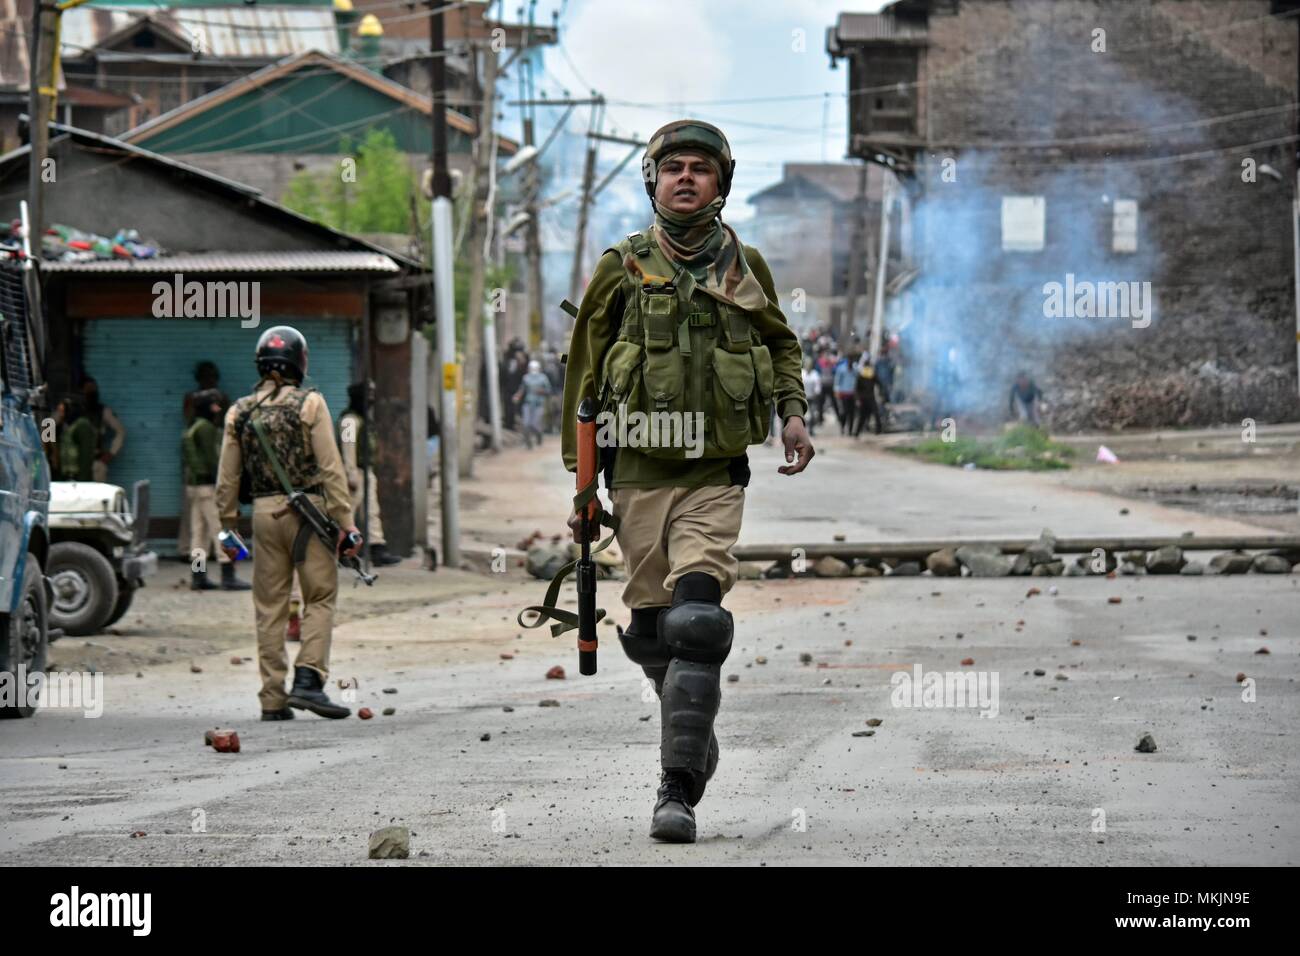 Srinagar, Kashmir. 8th May 2018. An paramilitary trooper can be seen in action during clashes in Srinagar, Kashmir. Fierce clashes broke out between government forces and Kashmiri protesters in Srinagar on Tuesday as the valley continued to remain tense over the killing of 11 people including 5 militants and 6 civilians in Kashmir. Police used tear smoke shells and shot gun pellets to disperse hundreds of demonstrators who hurled rocks and chanted anti-and pro-freedom slogans. Credit: SOPA Images Limited/Alamy Live News Stock Photo